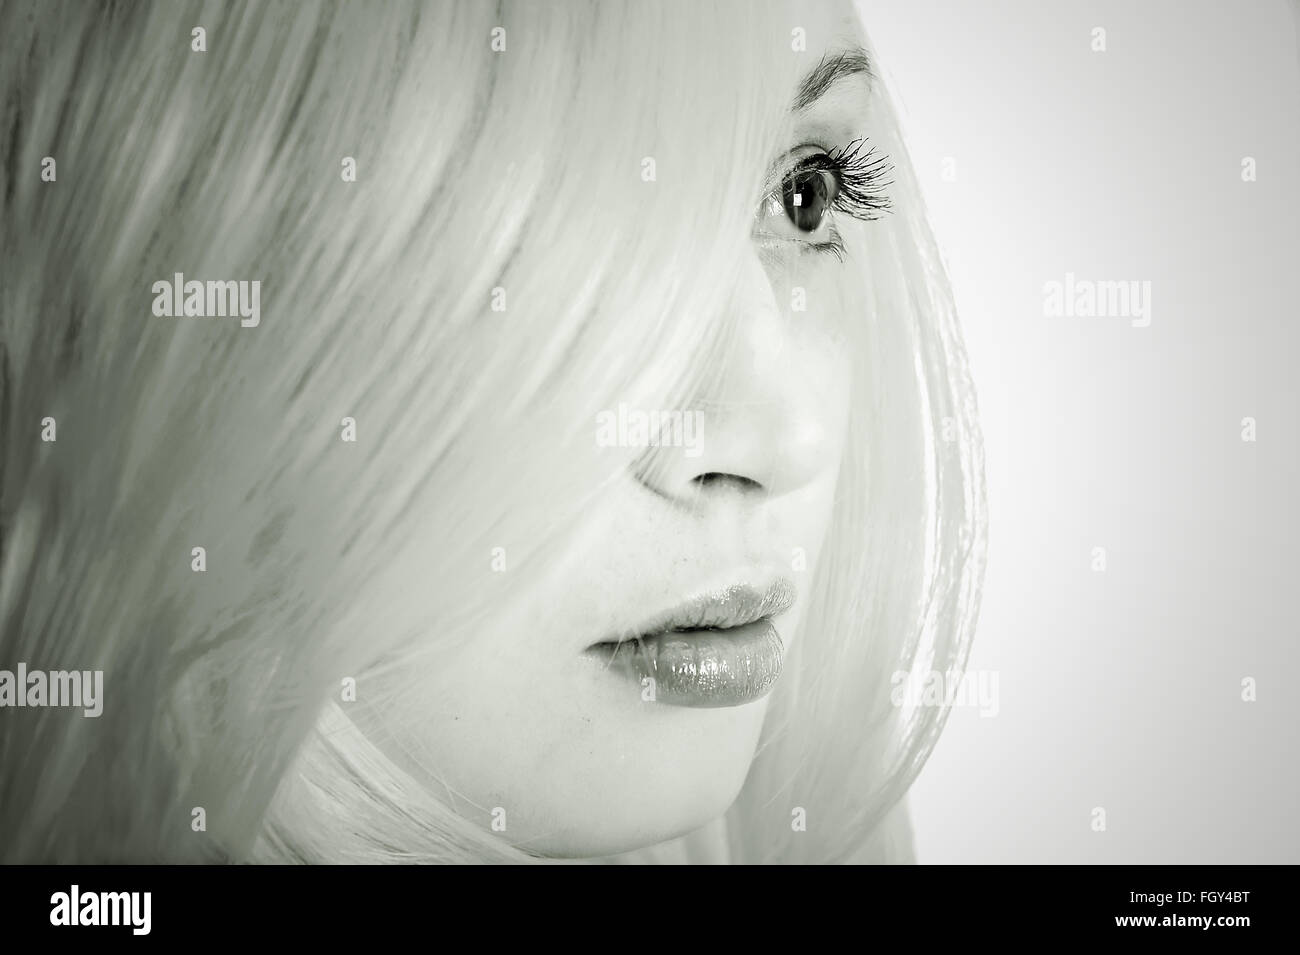 Black and white image of close up portrait of girl behind her white hair Stock Photo